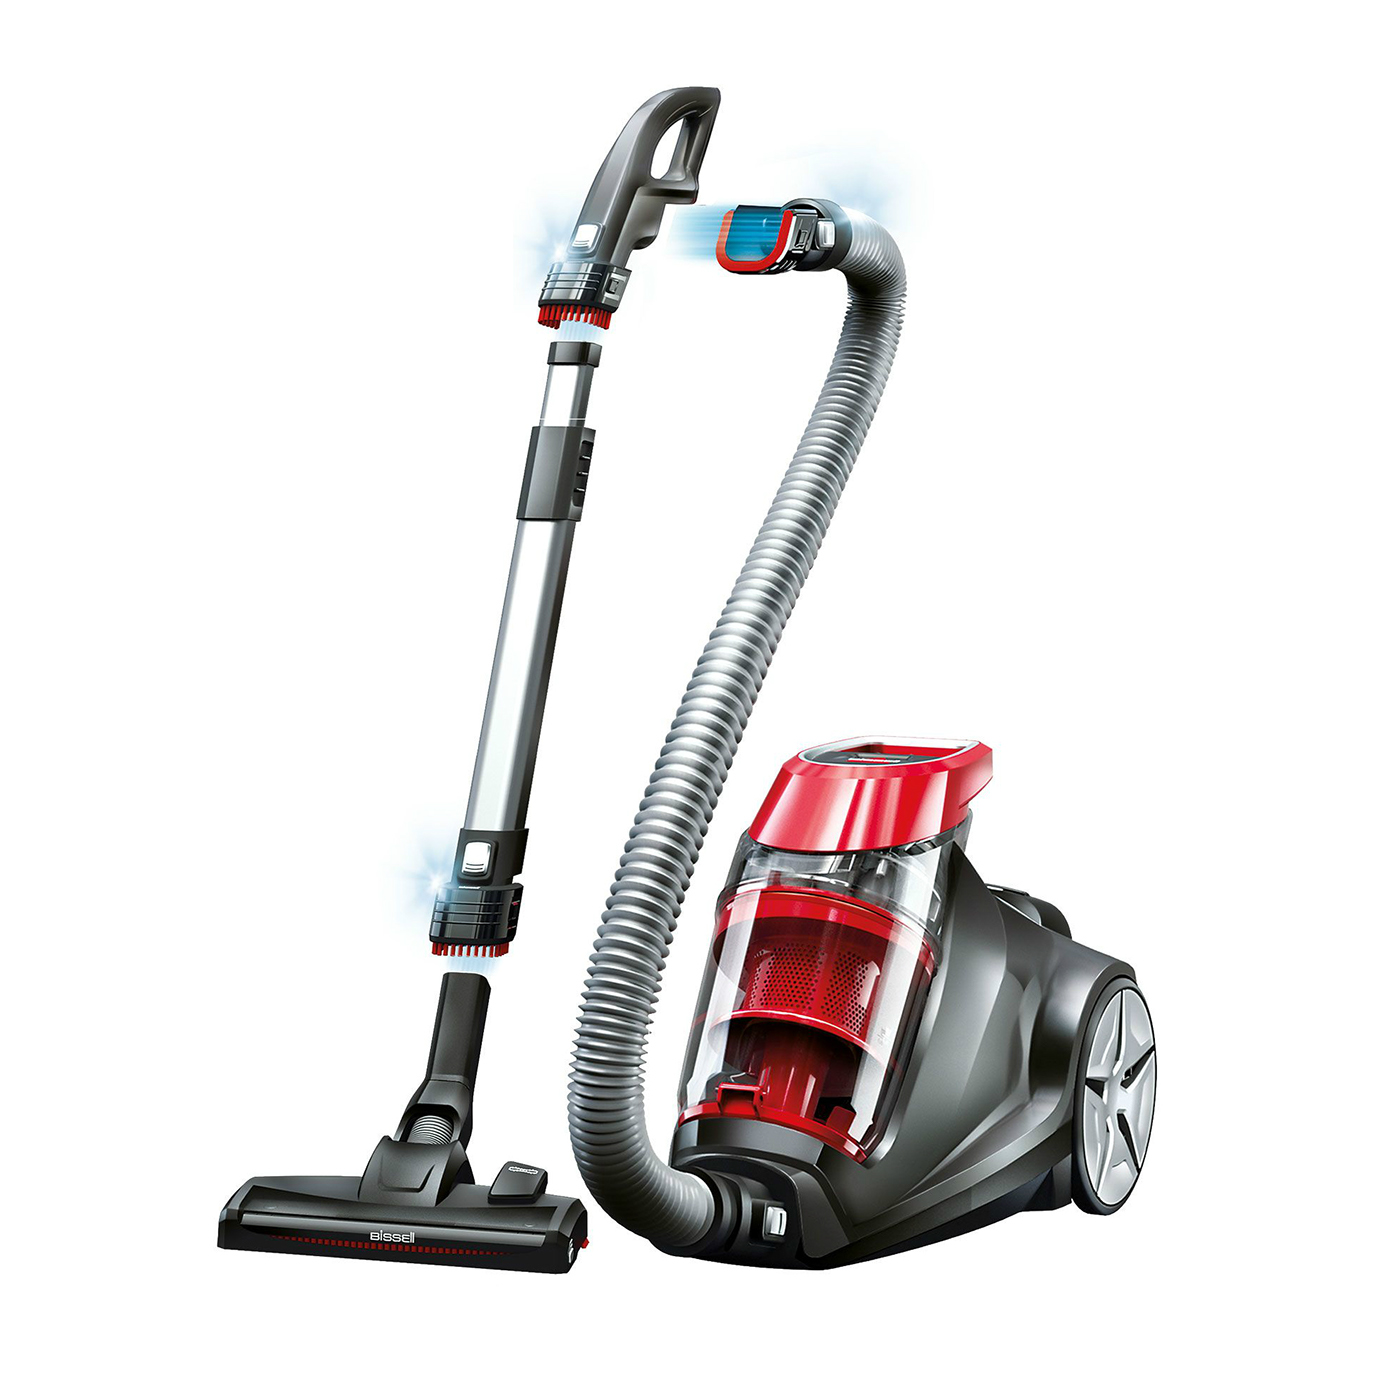 South asian pacific hepa bagless upright vacuum